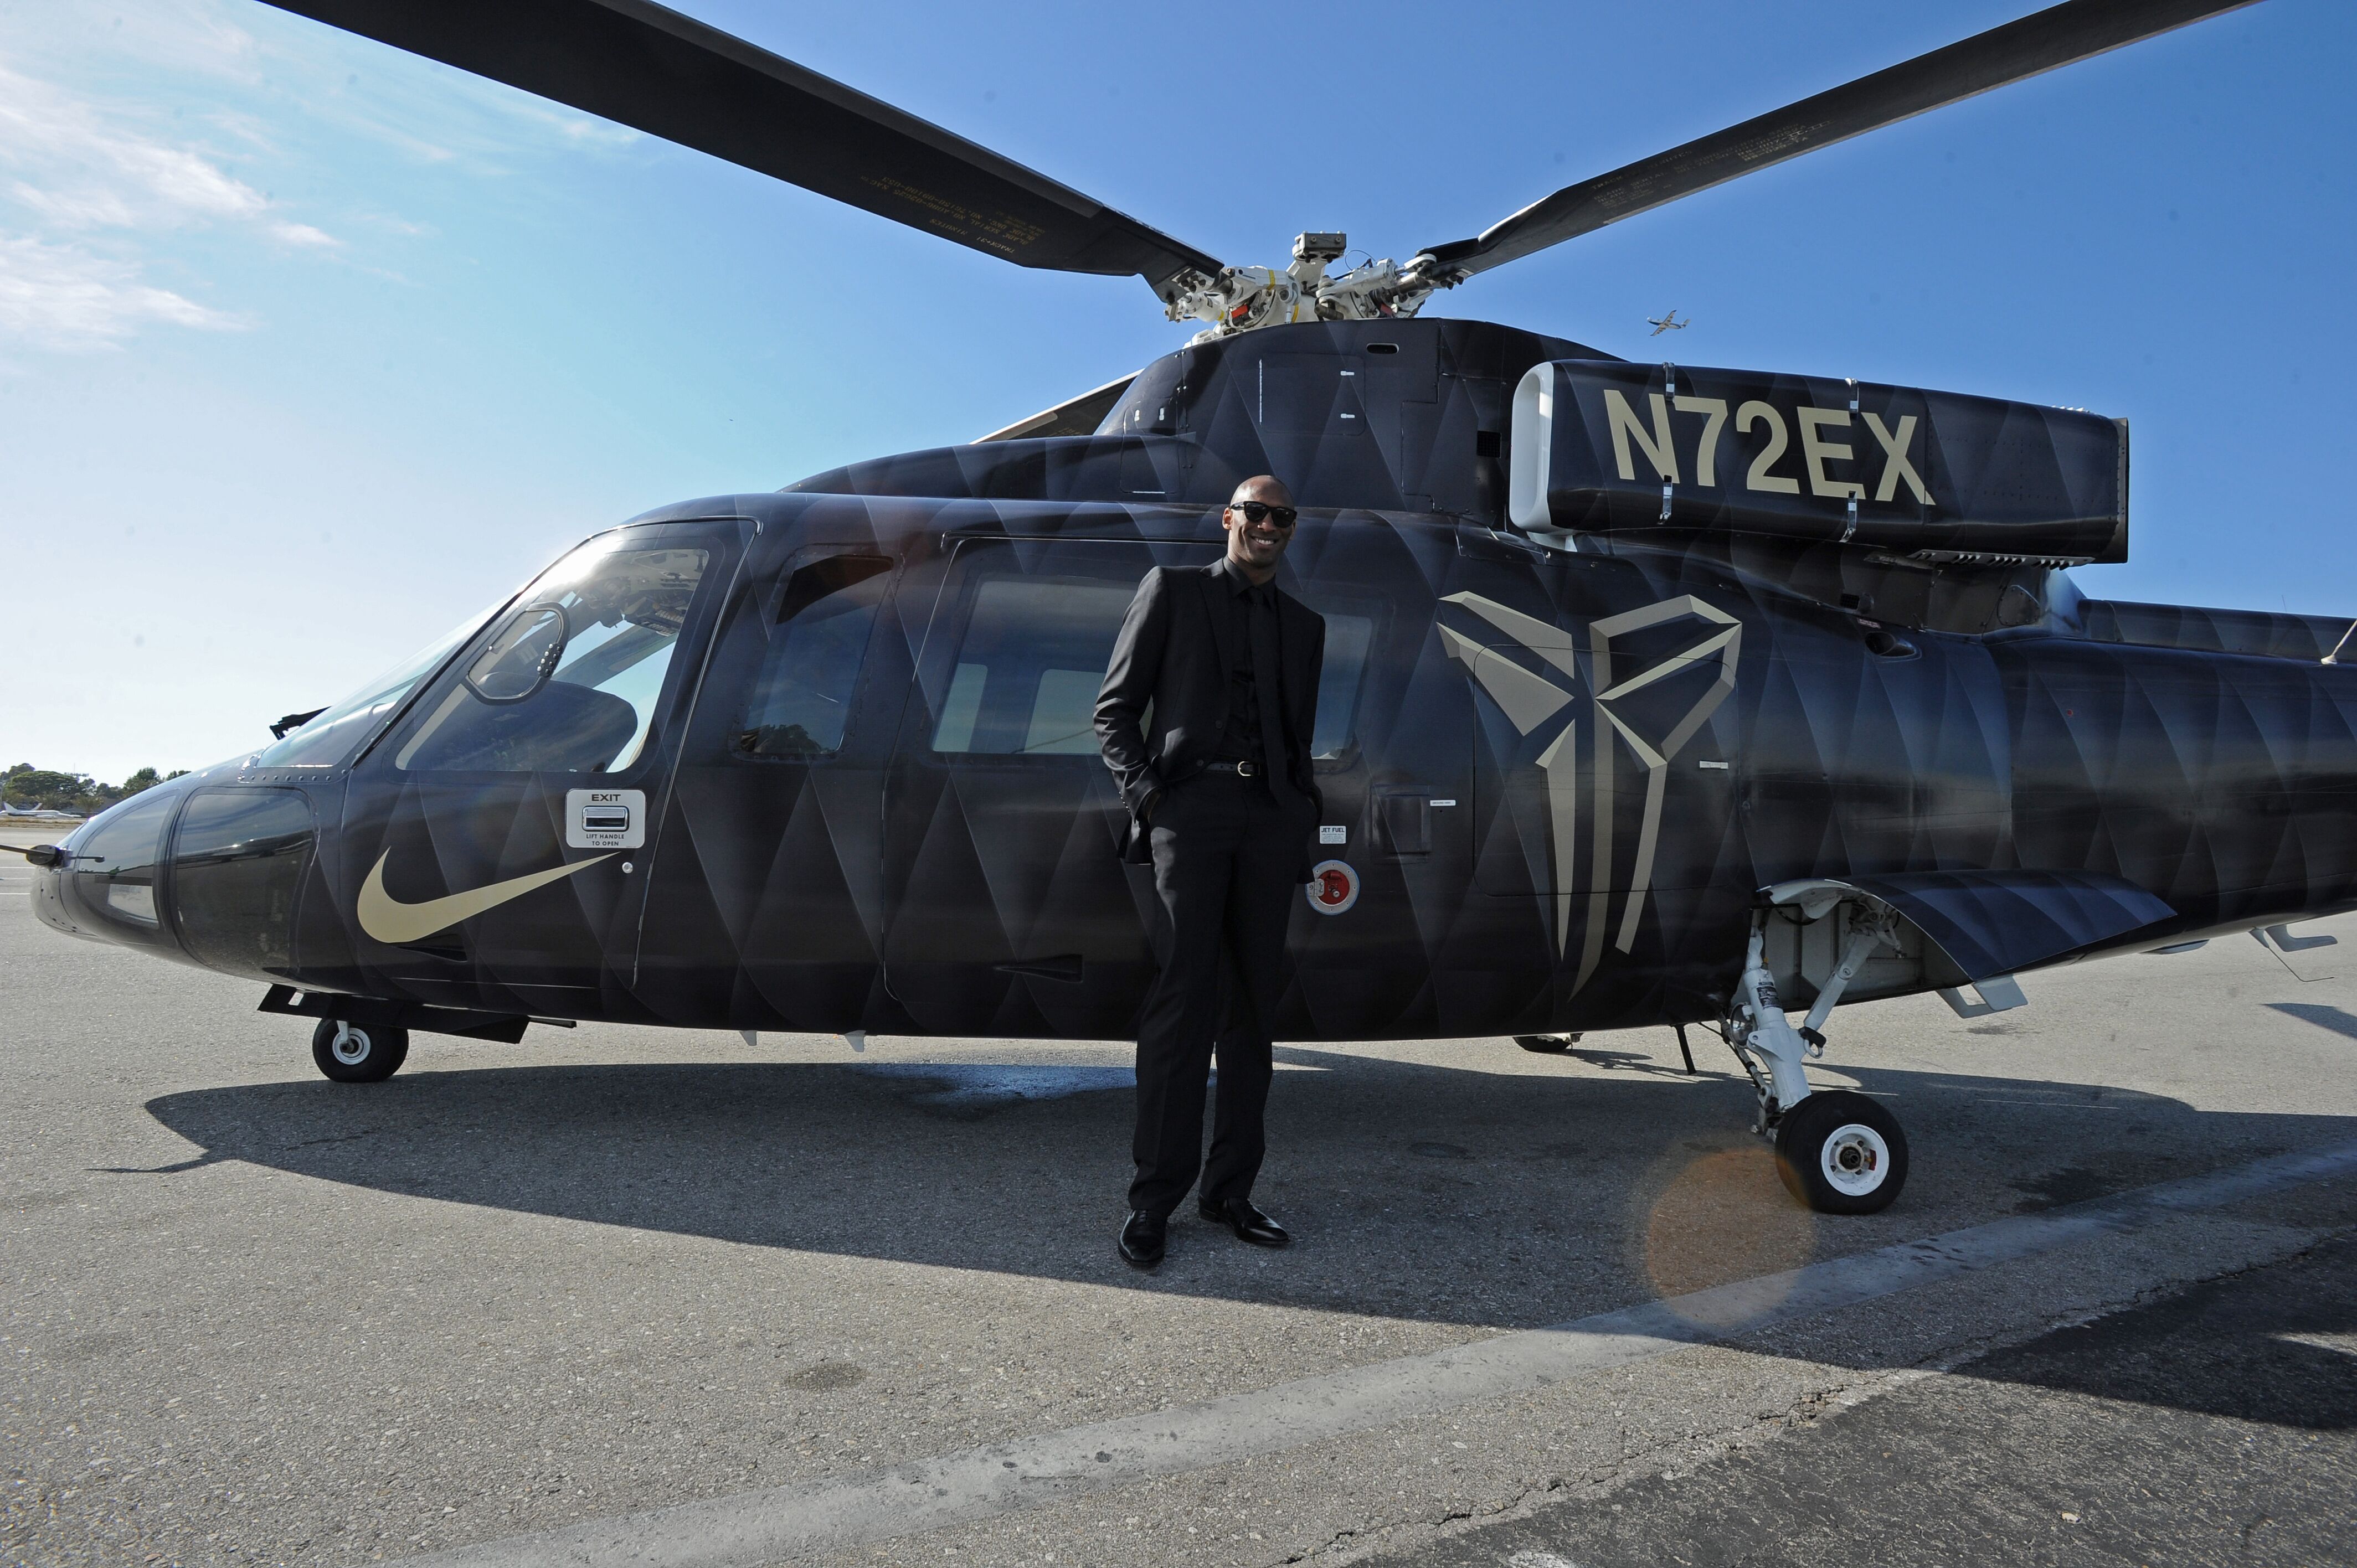 Kobe Bryant poses in front of his helicopter at Staples Center in Los Angeles, in 2016/ Source: Getty Images